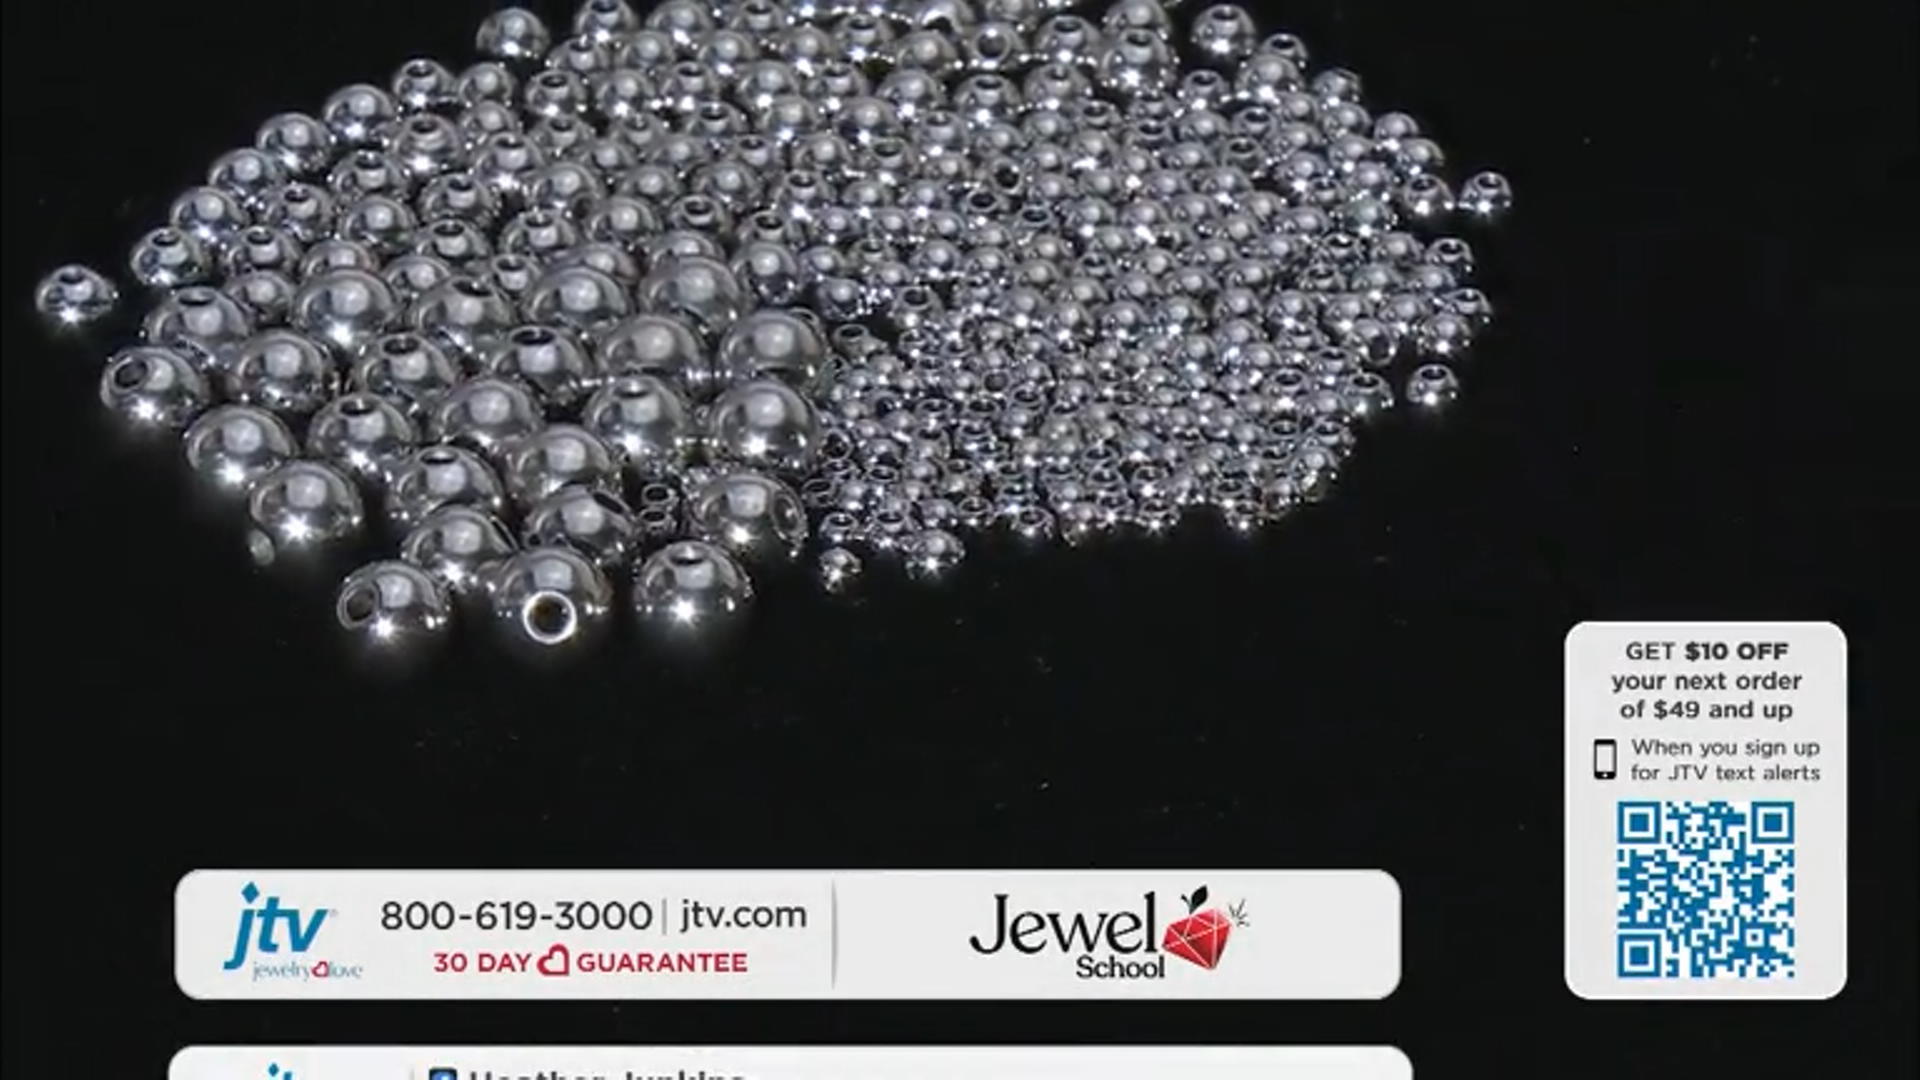 Stainless Steel Round Beads in 5 Sizes Appx 300 Pieces Total Video Thumbnail